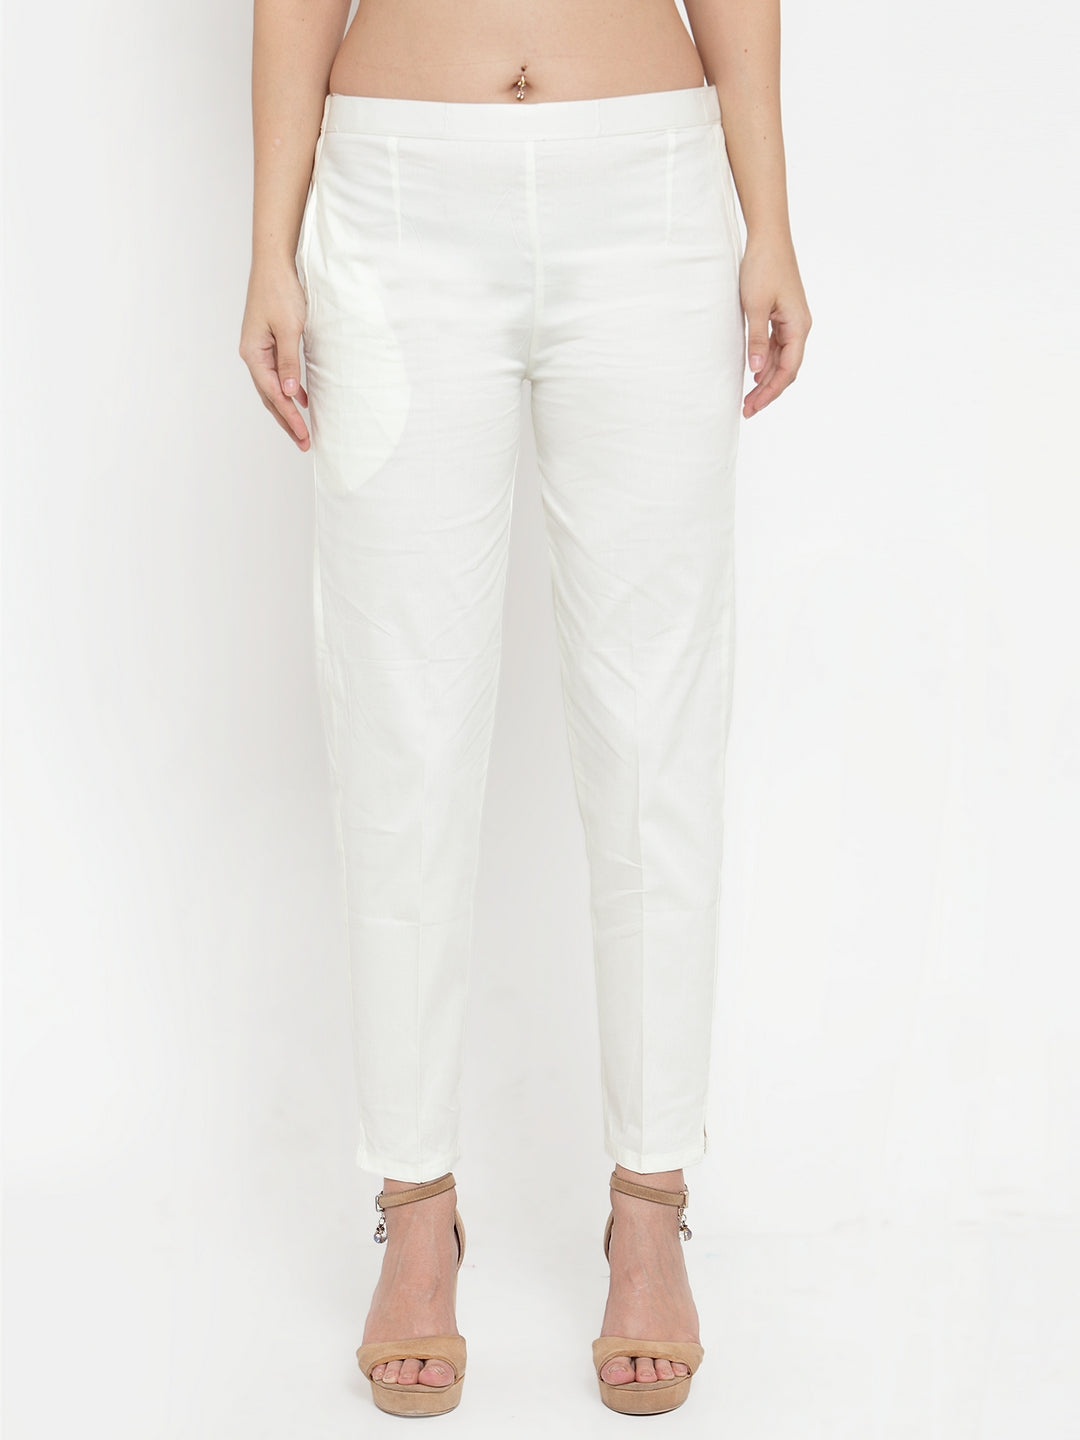 Clora Off-White Regular Fit Solid Pants